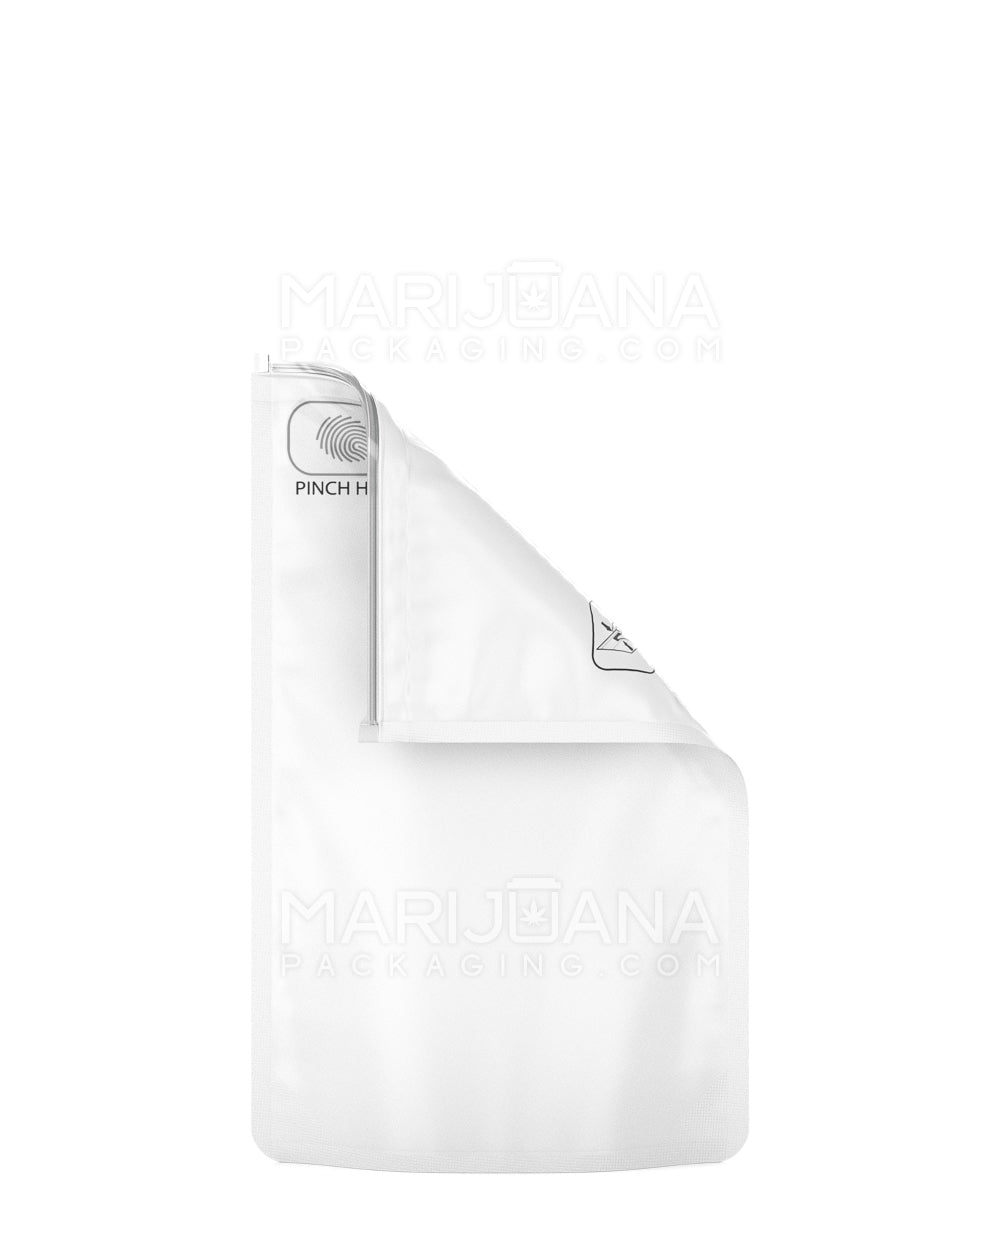 Child Resistant | Pinch N Slide ASTM Matte White Mylar Bags | 4in x 6.5in - 7g - 250 Count - 3